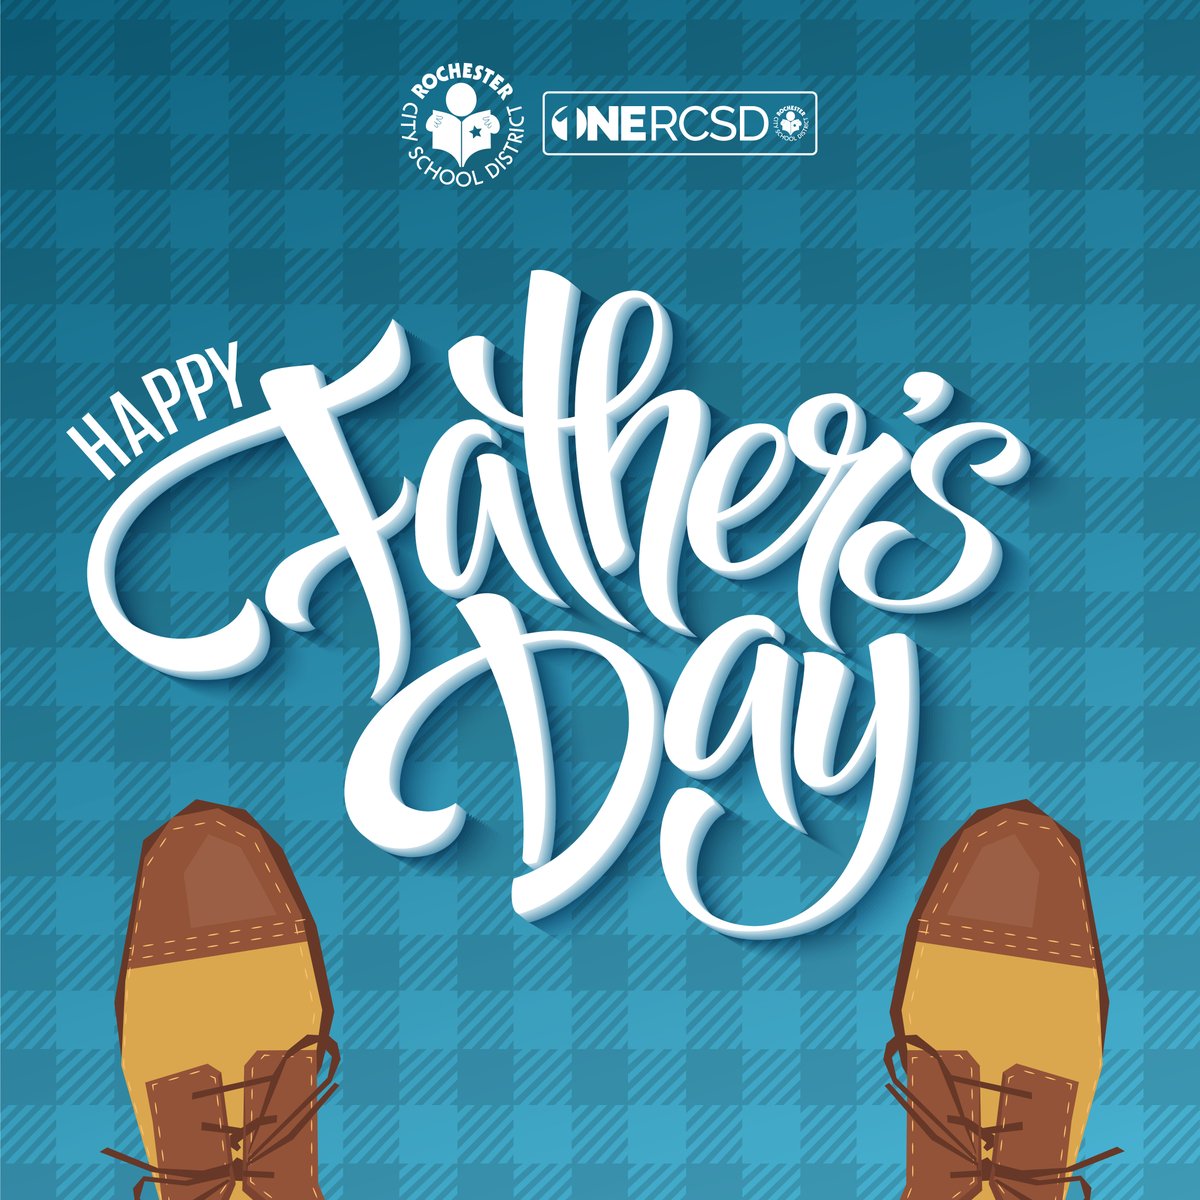 Happy Father’s Day to all the awesome dads in our District! You inspire us with your wisdom, support, and dedication. You rock! 🎉 We also support those who struggle with this day. We are here for you, and we respect your feelings. You are not alone. 💙

#ONERCSD